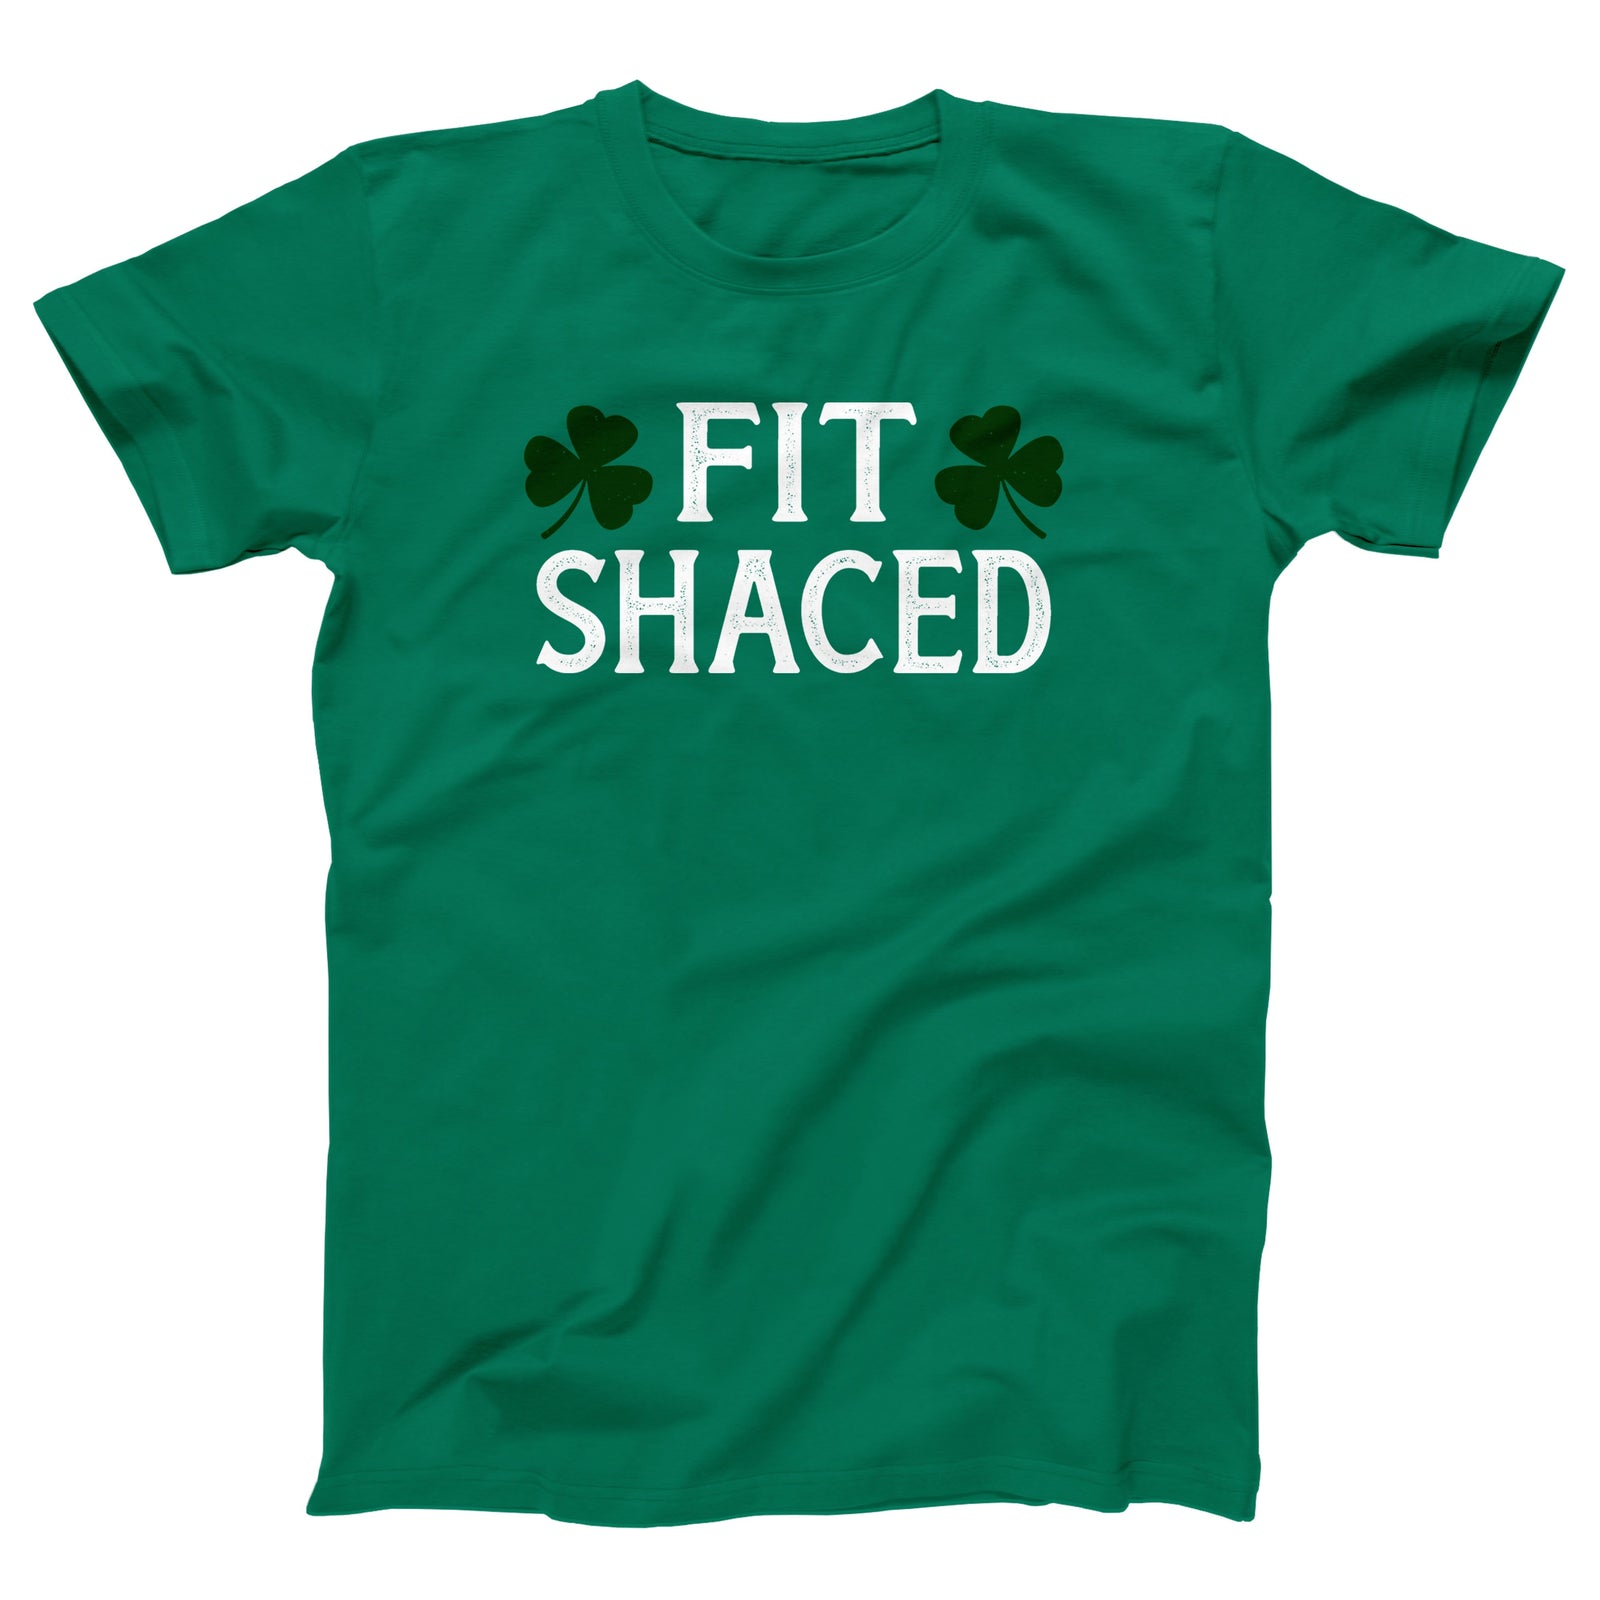 //cdn.shopify.com/s/files/1/0274/2488/2766/products/fit-shaced-menunisex-t-shirt-897296_5000x.jpg?v=1645626505 5000w,
    //cdn.shopify.com/s/files/1/0274/2488/2766/products/fit-shaced-menunisex-t-shirt-897296_4500x.jpg?v=1645626505 4500w,
    //cdn.shopify.com/s/files/1/0274/2488/2766/products/fit-shaced-menunisex-t-shirt-897296_4000x.jpg?v=1645626505 4000w,
    //cdn.shopify.com/s/files/1/0274/2488/2766/products/fit-shaced-menunisex-t-shirt-897296_3500x.jpg?v=1645626505 3500w,
    //cdn.shopify.com/s/files/1/0274/2488/2766/products/fit-shaced-menunisex-t-shirt-897296_3000x.jpg?v=1645626505 3000w,
    //cdn.shopify.com/s/files/1/0274/2488/2766/products/fit-shaced-menunisex-t-shirt-897296_2500x.jpg?v=1645626505 2500w,
    //cdn.shopify.com/s/files/1/0274/2488/2766/products/fit-shaced-menunisex-t-shirt-897296_2000x.jpg?v=1645626505 2000w,
    //cdn.shopify.com/s/files/1/0274/2488/2766/products/fit-shaced-menunisex-t-shirt-897296_1800x.jpg?v=1645626505 1800w,
    //cdn.shopify.com/s/files/1/0274/2488/2766/products/fit-shaced-menunisex-t-shirt-897296_1600x.jpg?v=1645626505 1600w,
    //cdn.shopify.com/s/files/1/0274/2488/2766/products/fit-shaced-menunisex-t-shirt-897296_1400x.jpg?v=1645626505 1400w,
    //cdn.shopify.com/s/files/1/0274/2488/2766/products/fit-shaced-menunisex-t-shirt-897296_1200x.jpg?v=1645626505 1200w,
    //cdn.shopify.com/s/files/1/0274/2488/2766/products/fit-shaced-menunisex-t-shirt-897296_1000x.jpg?v=1645626505 1000w,
    //cdn.shopify.com/s/files/1/0274/2488/2766/products/fit-shaced-menunisex-t-shirt-897296_800x.jpg?v=1645626505 800w,
    //cdn.shopify.com/s/files/1/0274/2488/2766/products/fit-shaced-menunisex-t-shirt-897296_600x.jpg?v=1645626505 600w,
    //cdn.shopify.com/s/files/1/0274/2488/2766/products/fit-shaced-menunisex-t-shirt-897296_400x.jpg?v=1645626505 400w,
    //cdn.shopify.com/s/files/1/0274/2488/2766/products/fit-shaced-menunisex-t-shirt-897296_200x.jpg?v=1645626505 200w